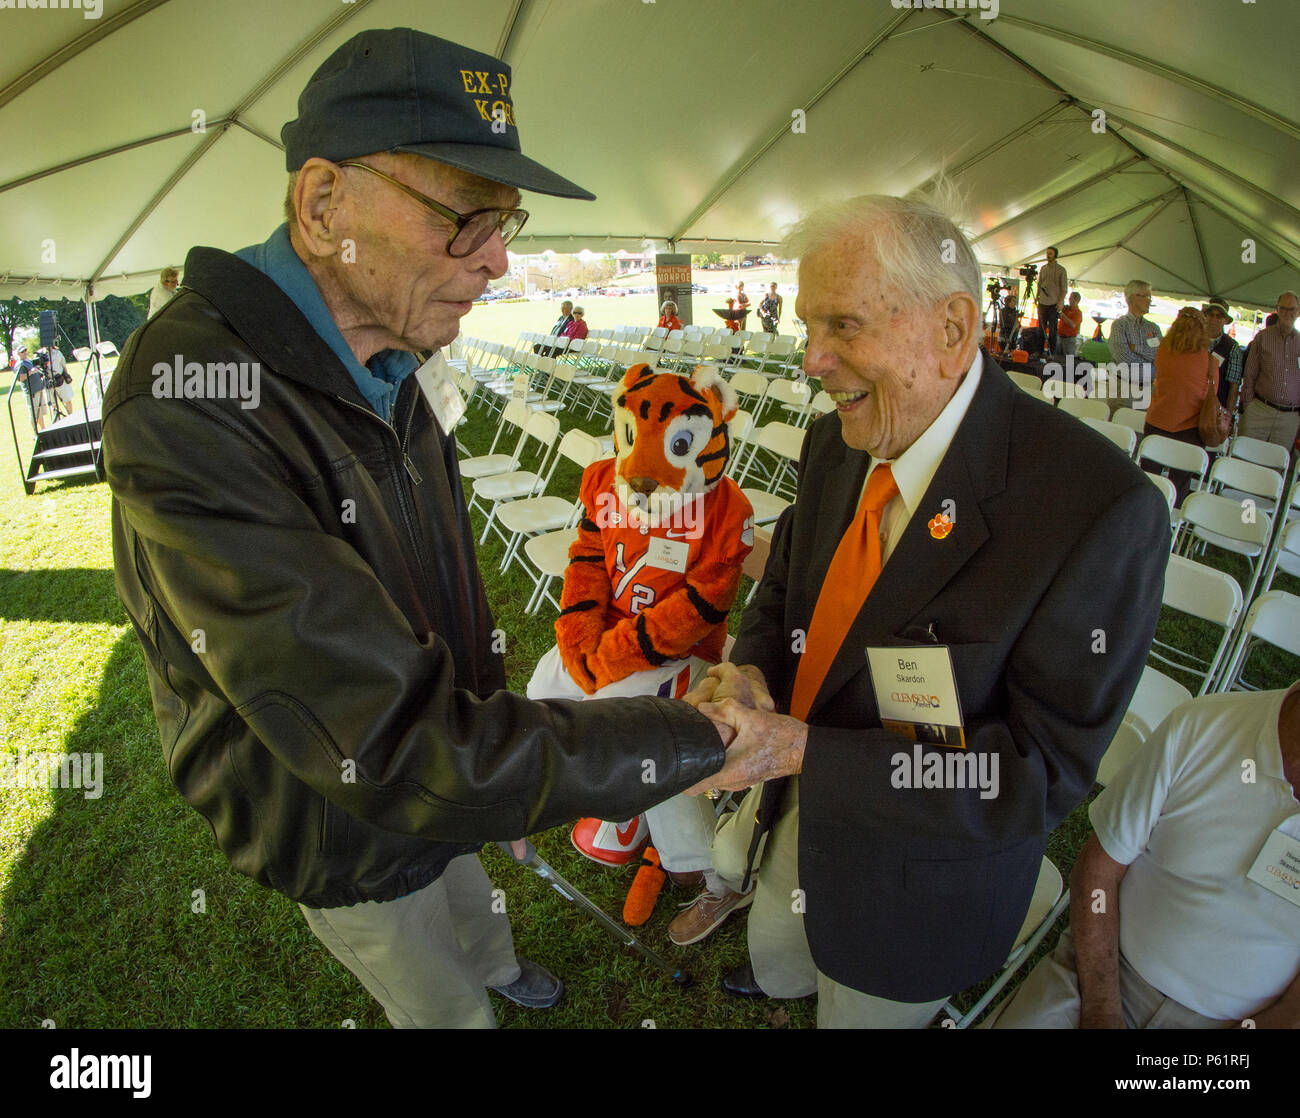 Korean War veteran and P.O.W. Bill Funchess greets World War II veteran and P.O.W. Ben Skardon during Clemson University's Reserve Officers' Training Corps 100th anniversary celebration, April 14, 2016. Both men graduated from Clemson's ROTC program - Skardon in 1938 and Funchess in 1948. (Photo by Ken Scar) Stock Photo